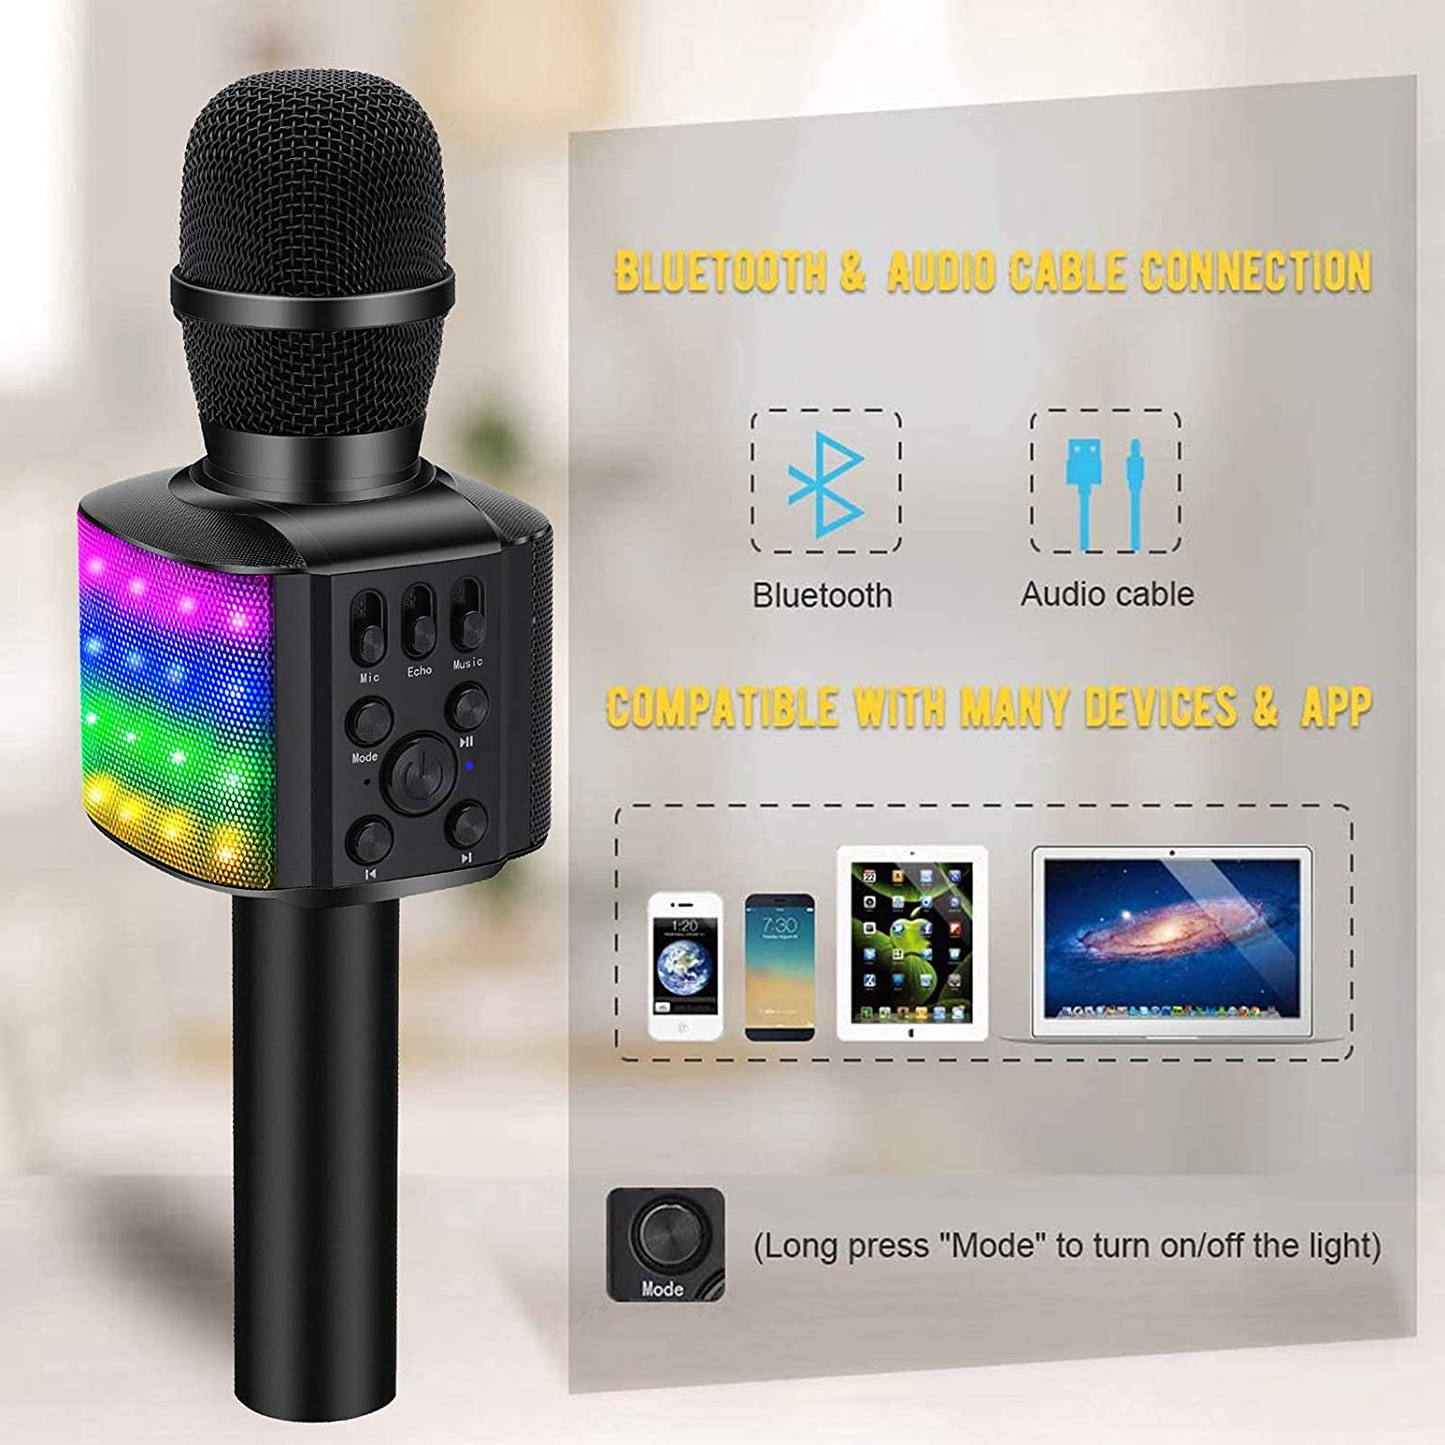 BONAOK Wireless Bluetooth Karaoke Microphone with controllable LED Lights, 4 in 1 Portable Karaoke Machine Mic Speaker Birthday Home Party for All Smartphones PC(Q36 Black)